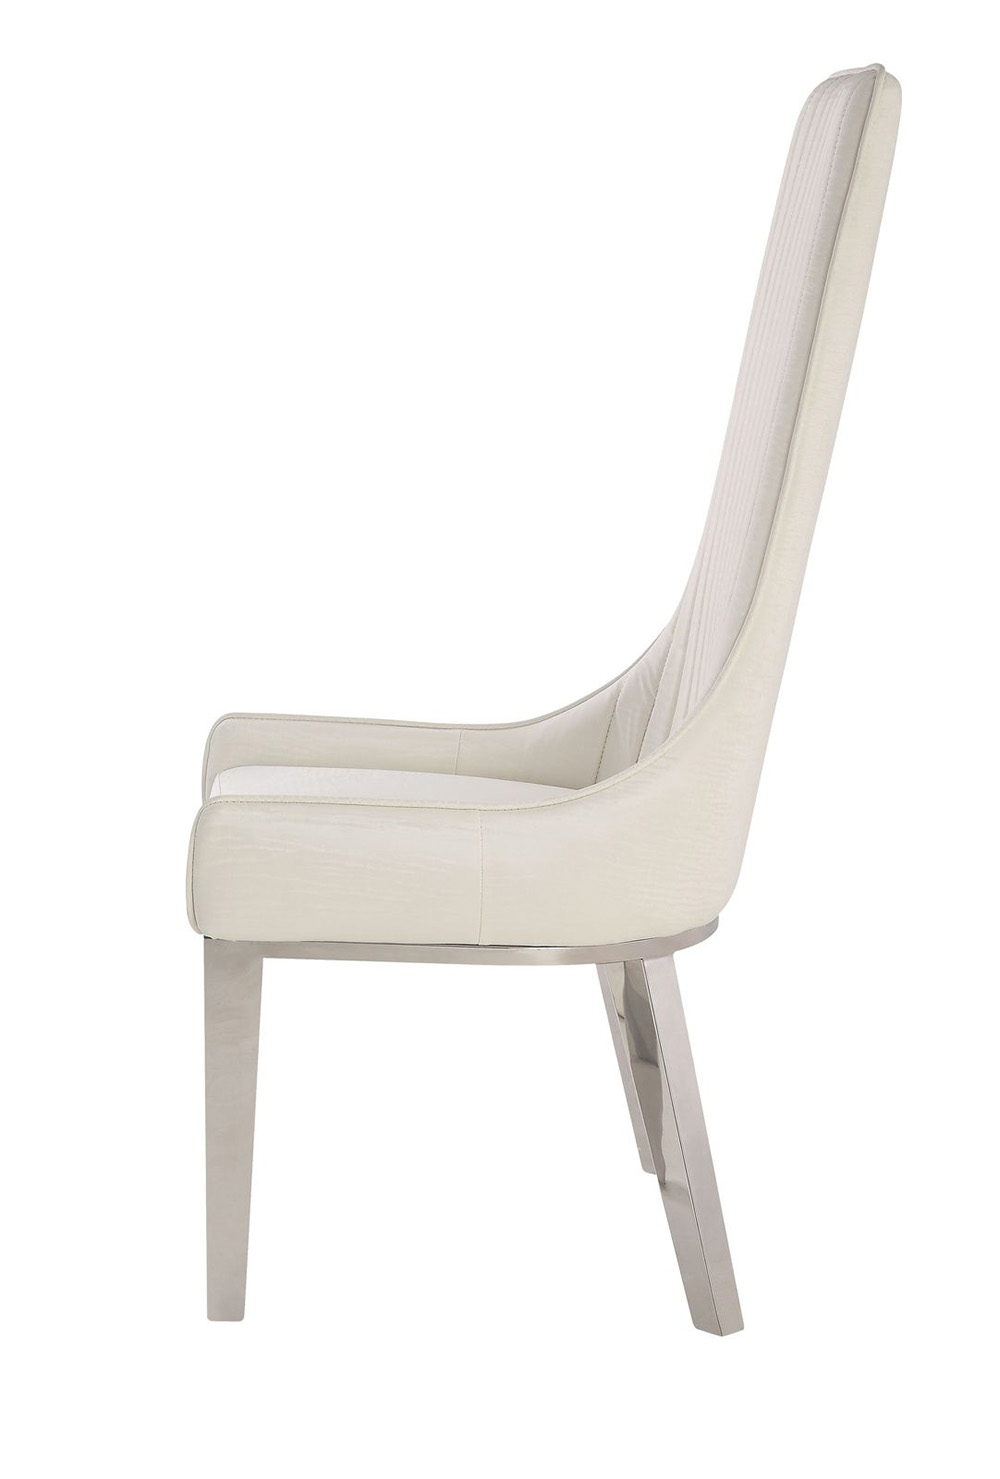 ACME Gianna PU Upholstered Dining Chair Set of 2, with High Backrest, and Metal Legs, for Restaurant, Cafe, Tavern, Office, Living Room - White